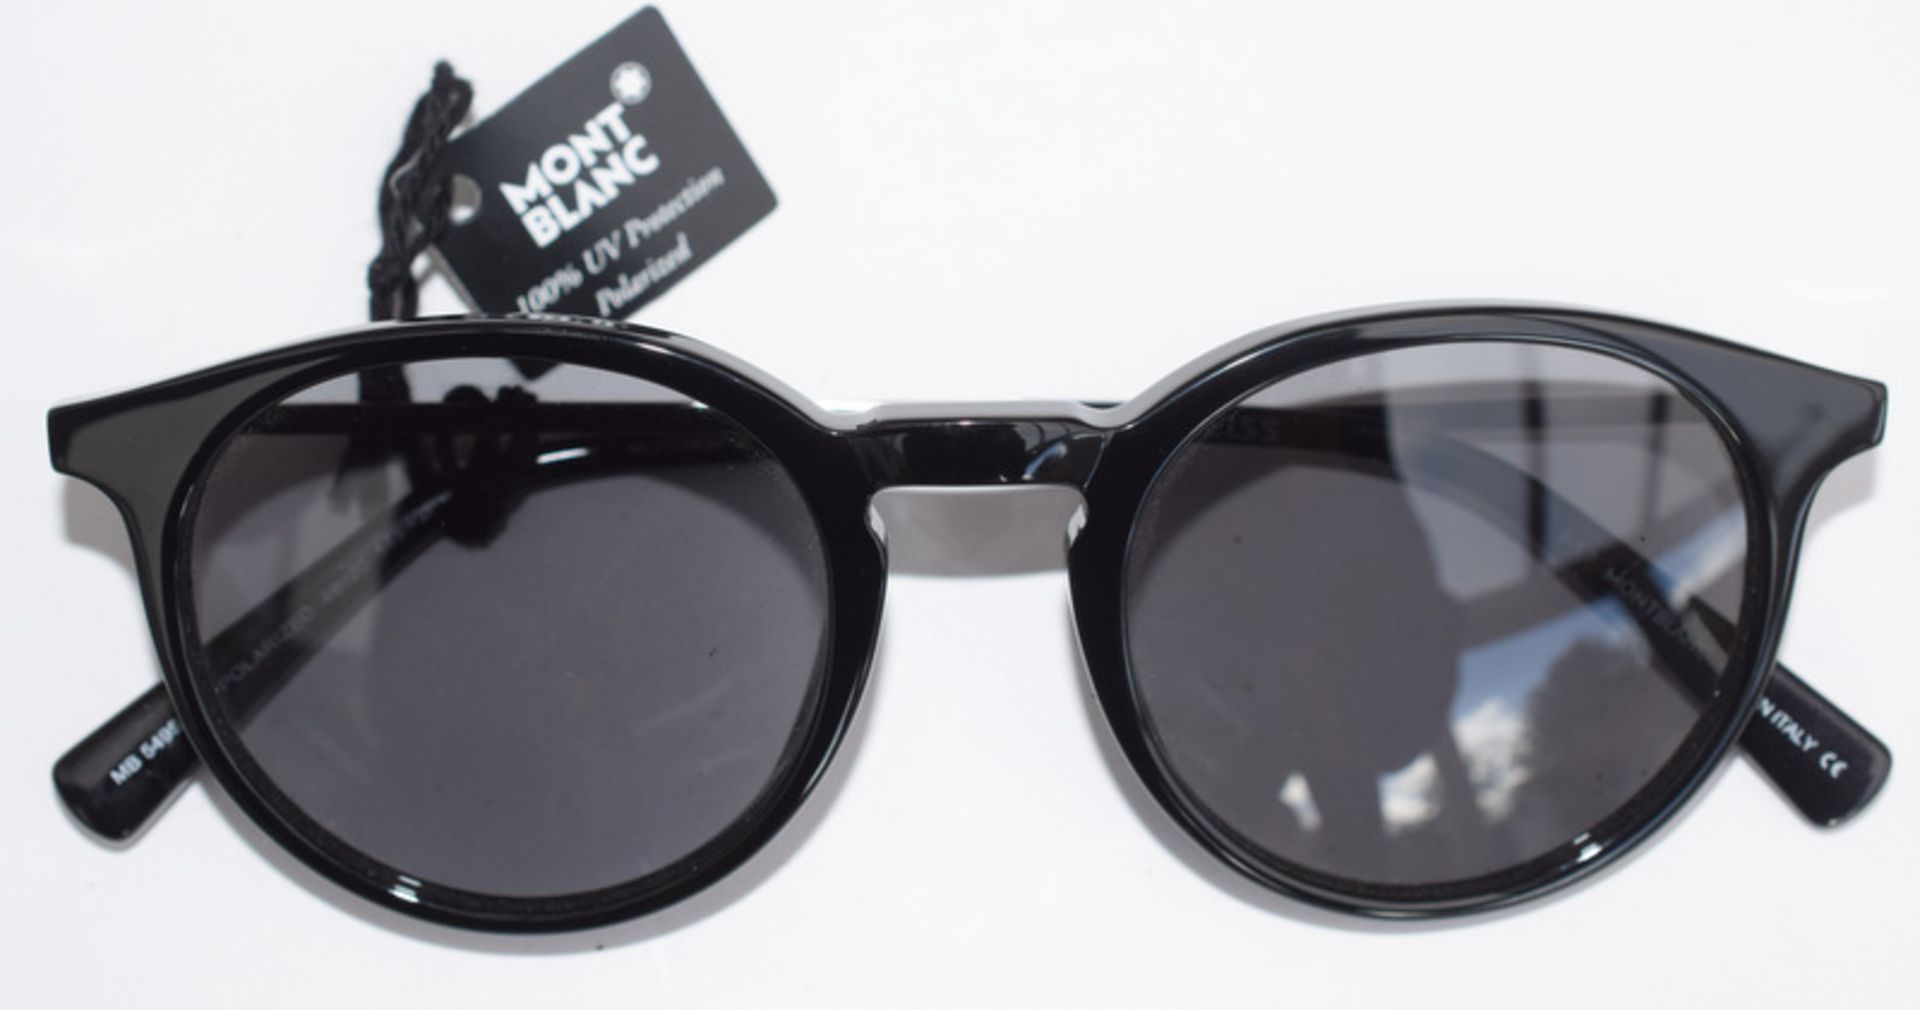 MontBlanc Sunglasses With Zeiss Lenses - Image 4 of 4